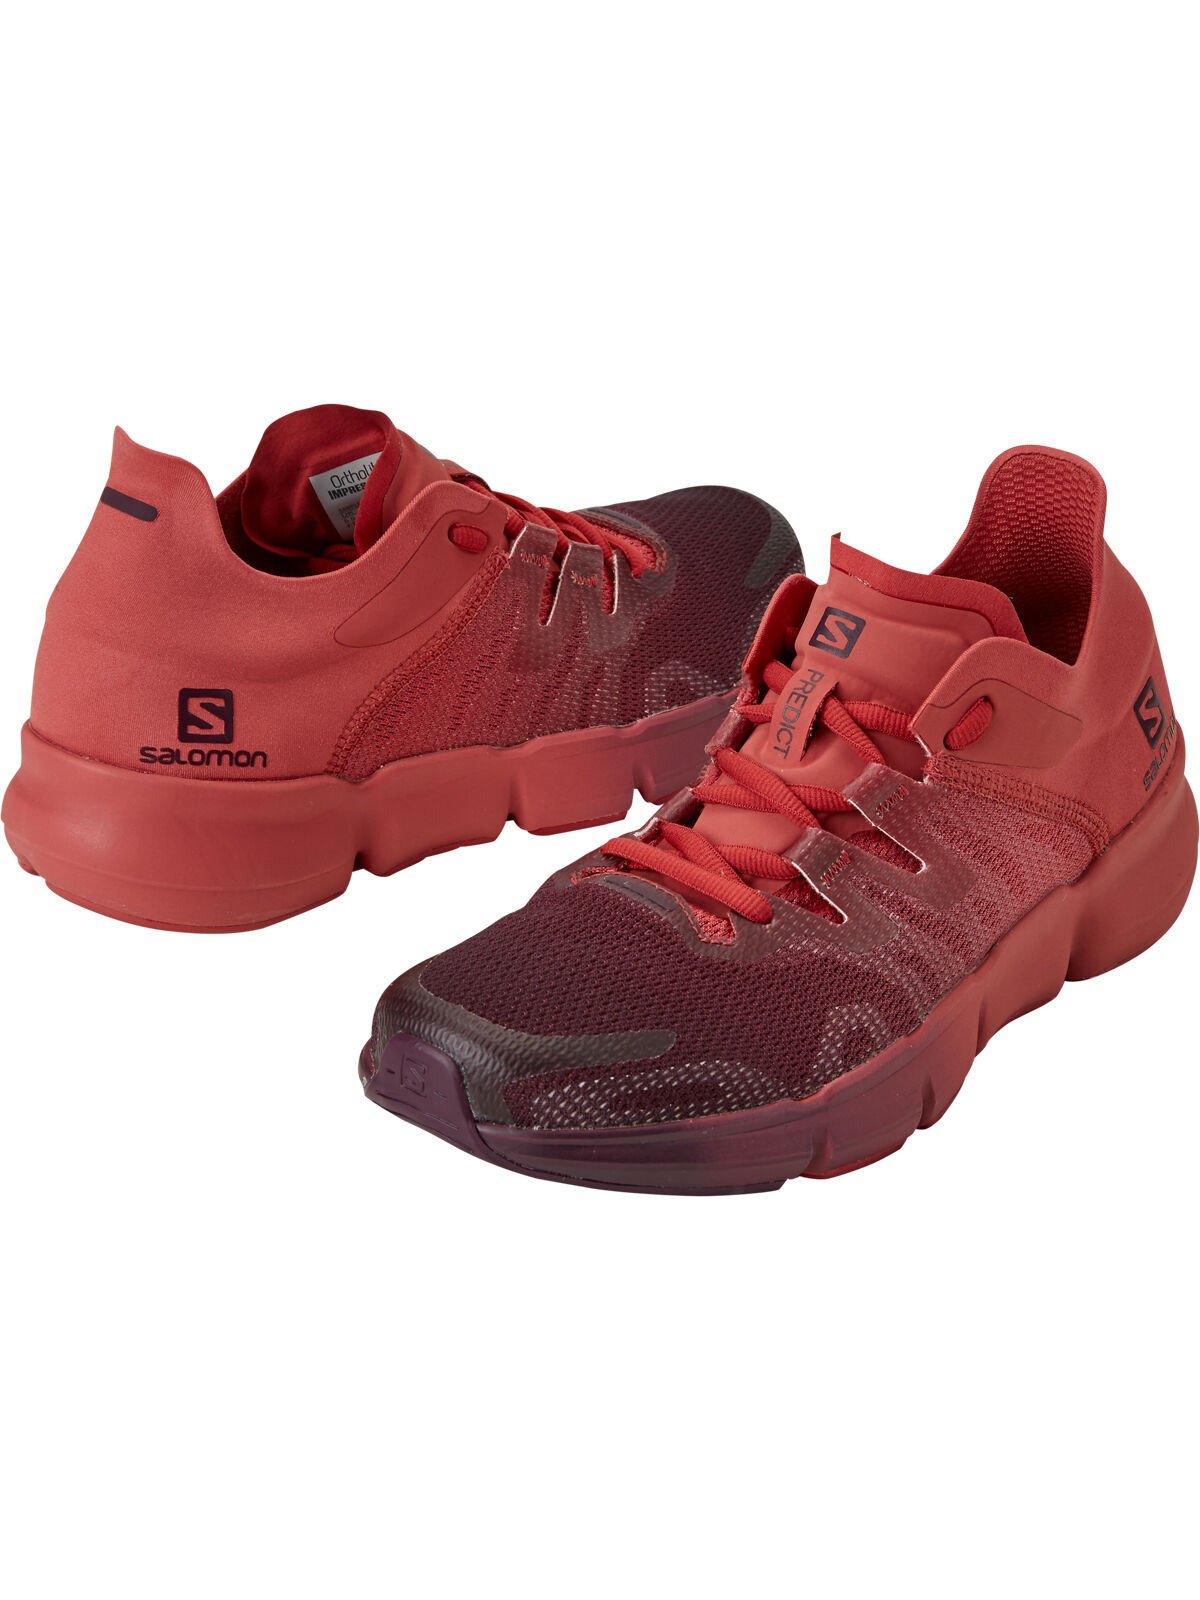 dw sports running shoes fitting